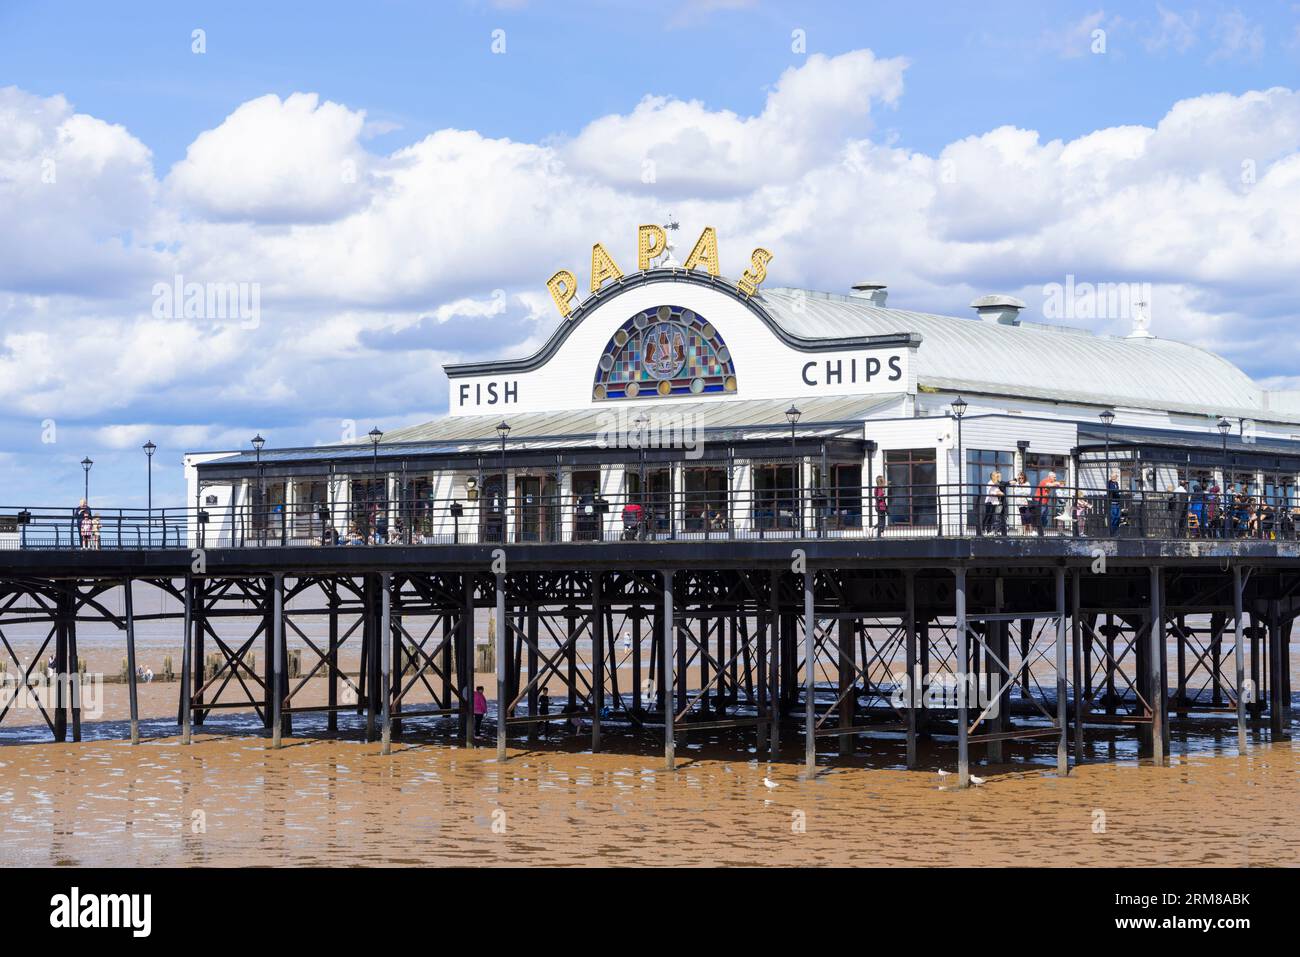 Cleethorpes Pier Cleethorpes Papas Fish and Chips Restaurant und Imbiss am Pier in Cleethorpes Lincolnshire England UK GB Europe Stockfoto